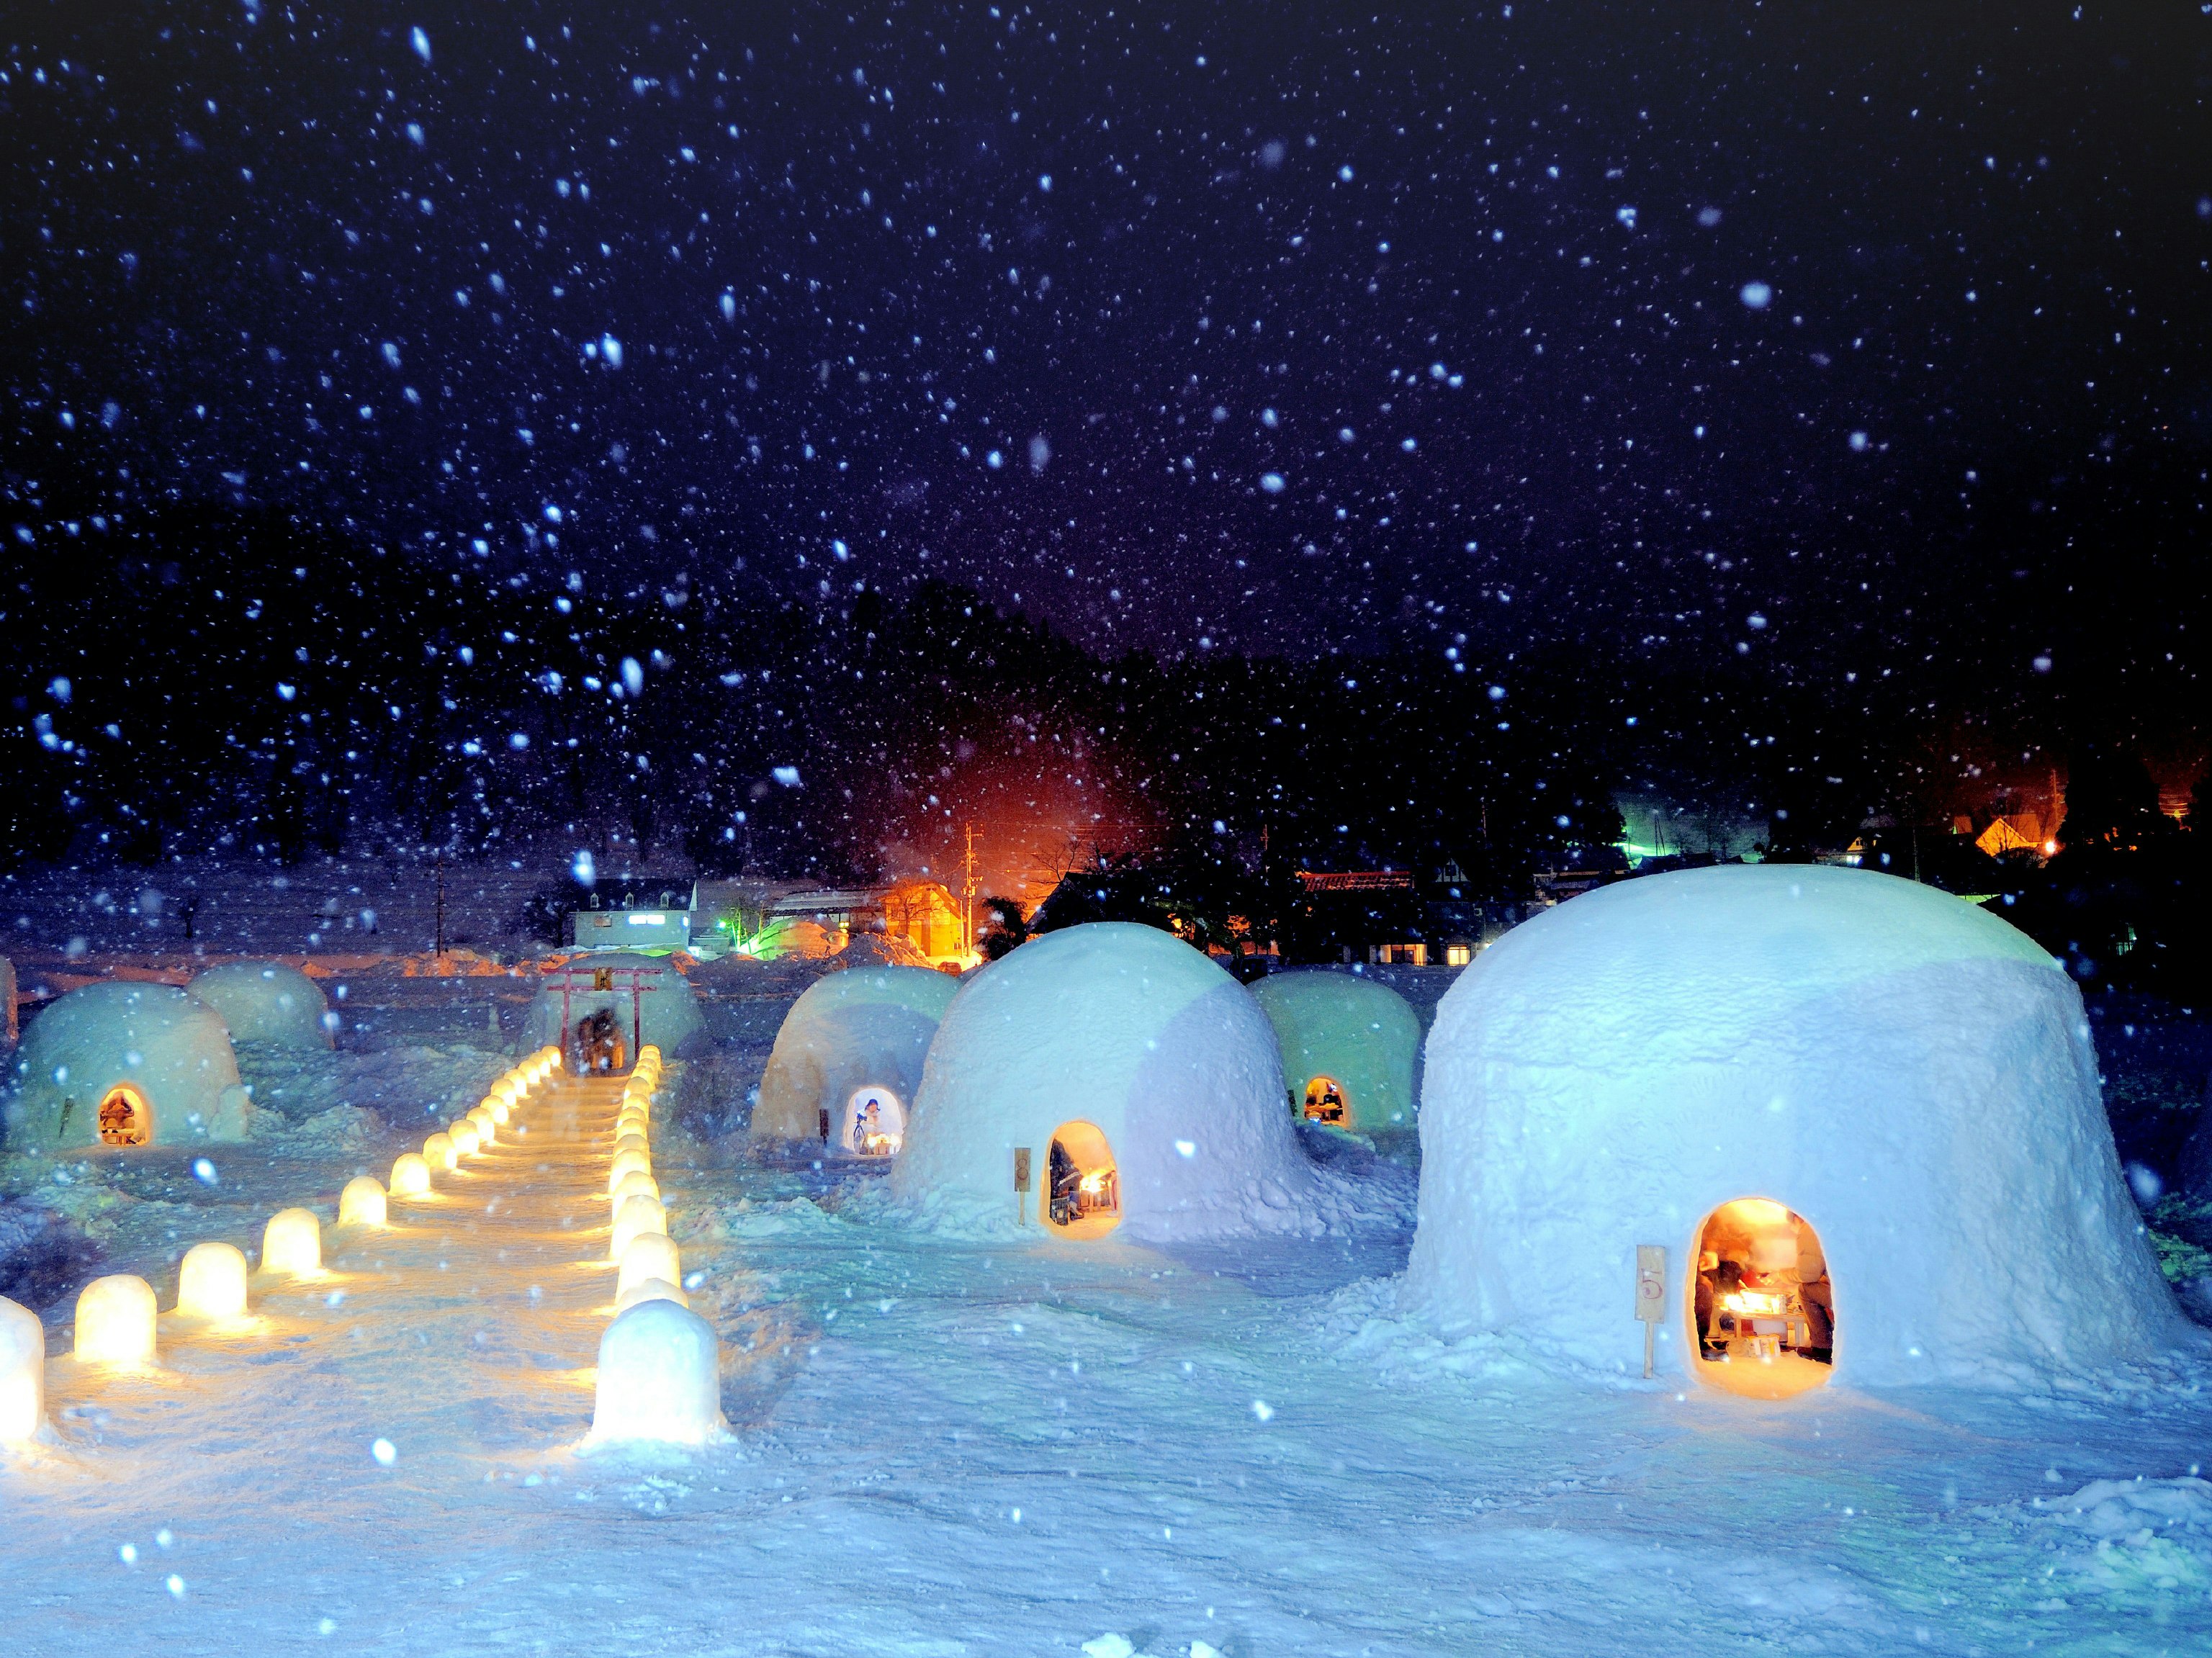 A snowy, night-time scene of a collection of igloos at Iiyama Kamakura Village in Nagano; through the igloos' small arched doors, people are visible in the latern-lit interiors. 